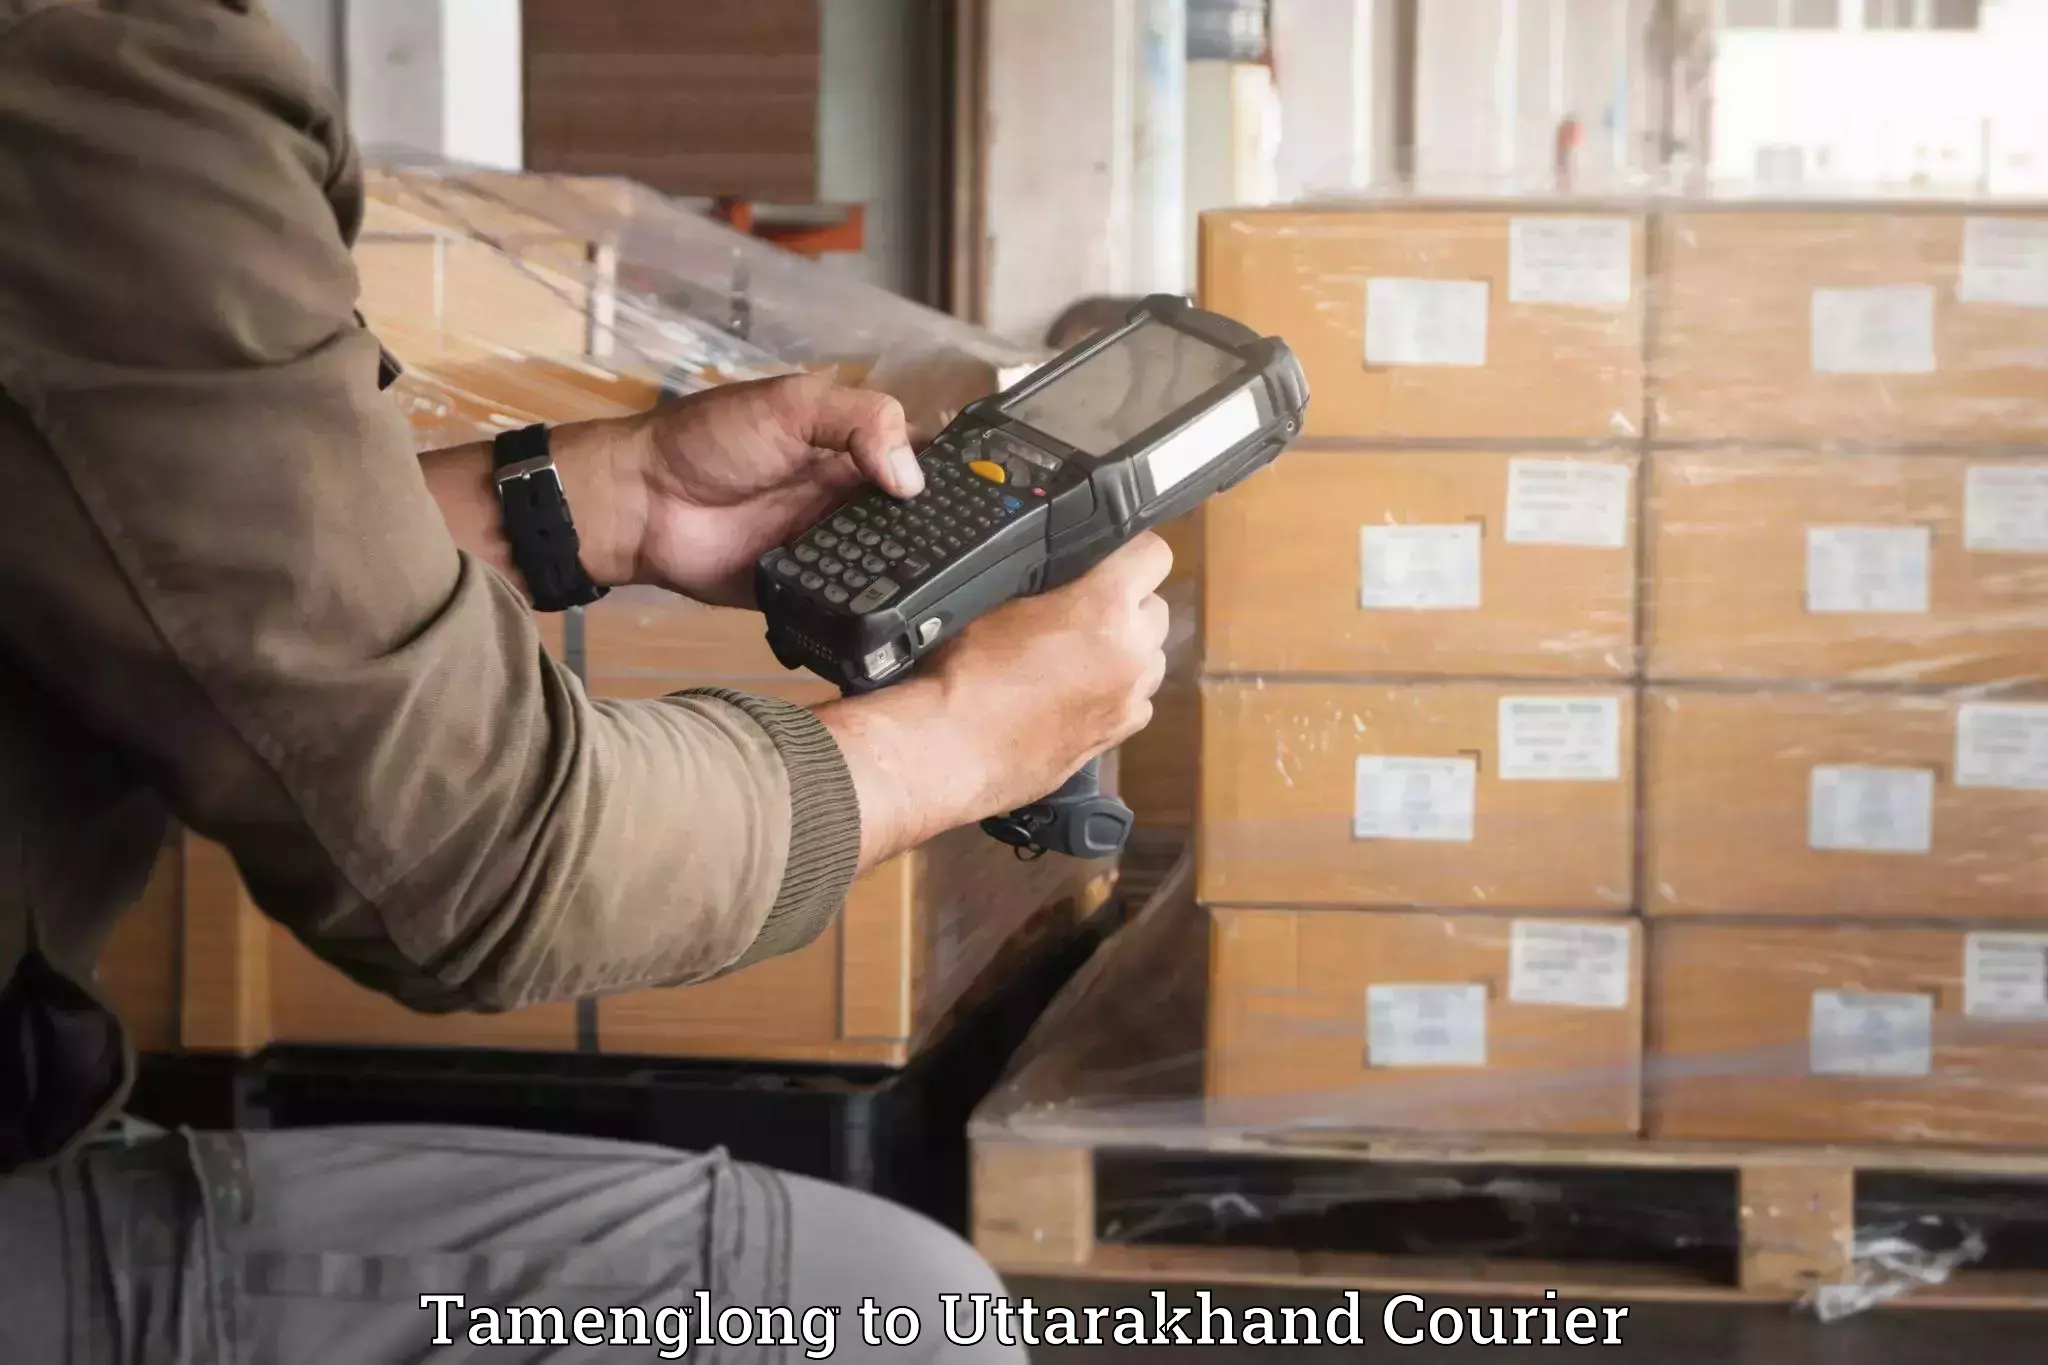 Luggage shipment specialists Tamenglong to Bhagwanpur